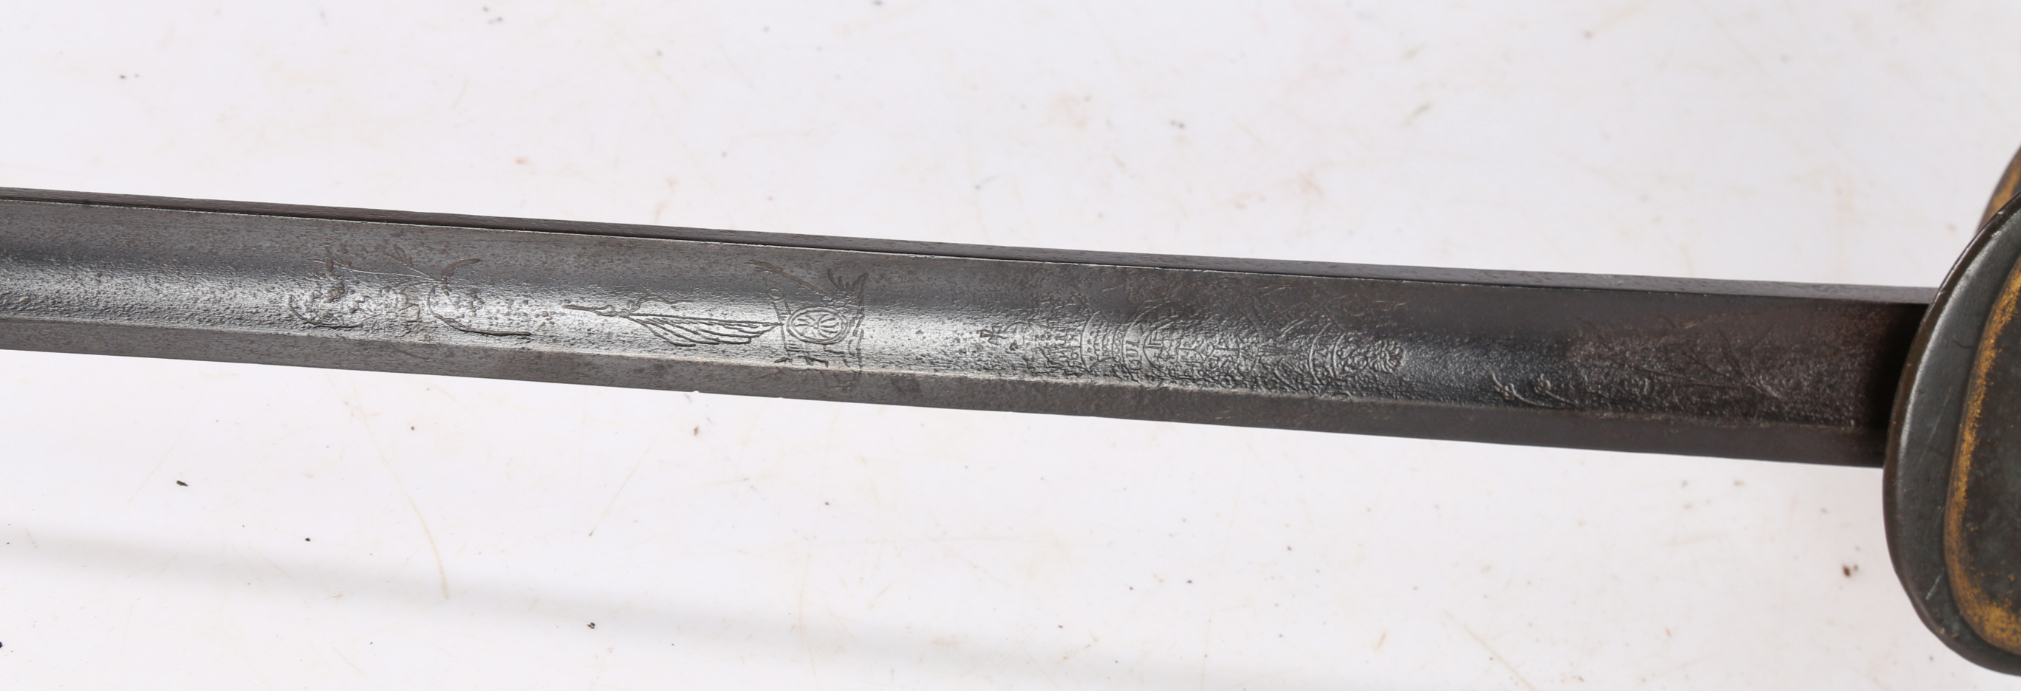 A British 1796 Pattern Officers Sword, steel blade engraved with crown over 'GR' and stand of arms - Image 6 of 7